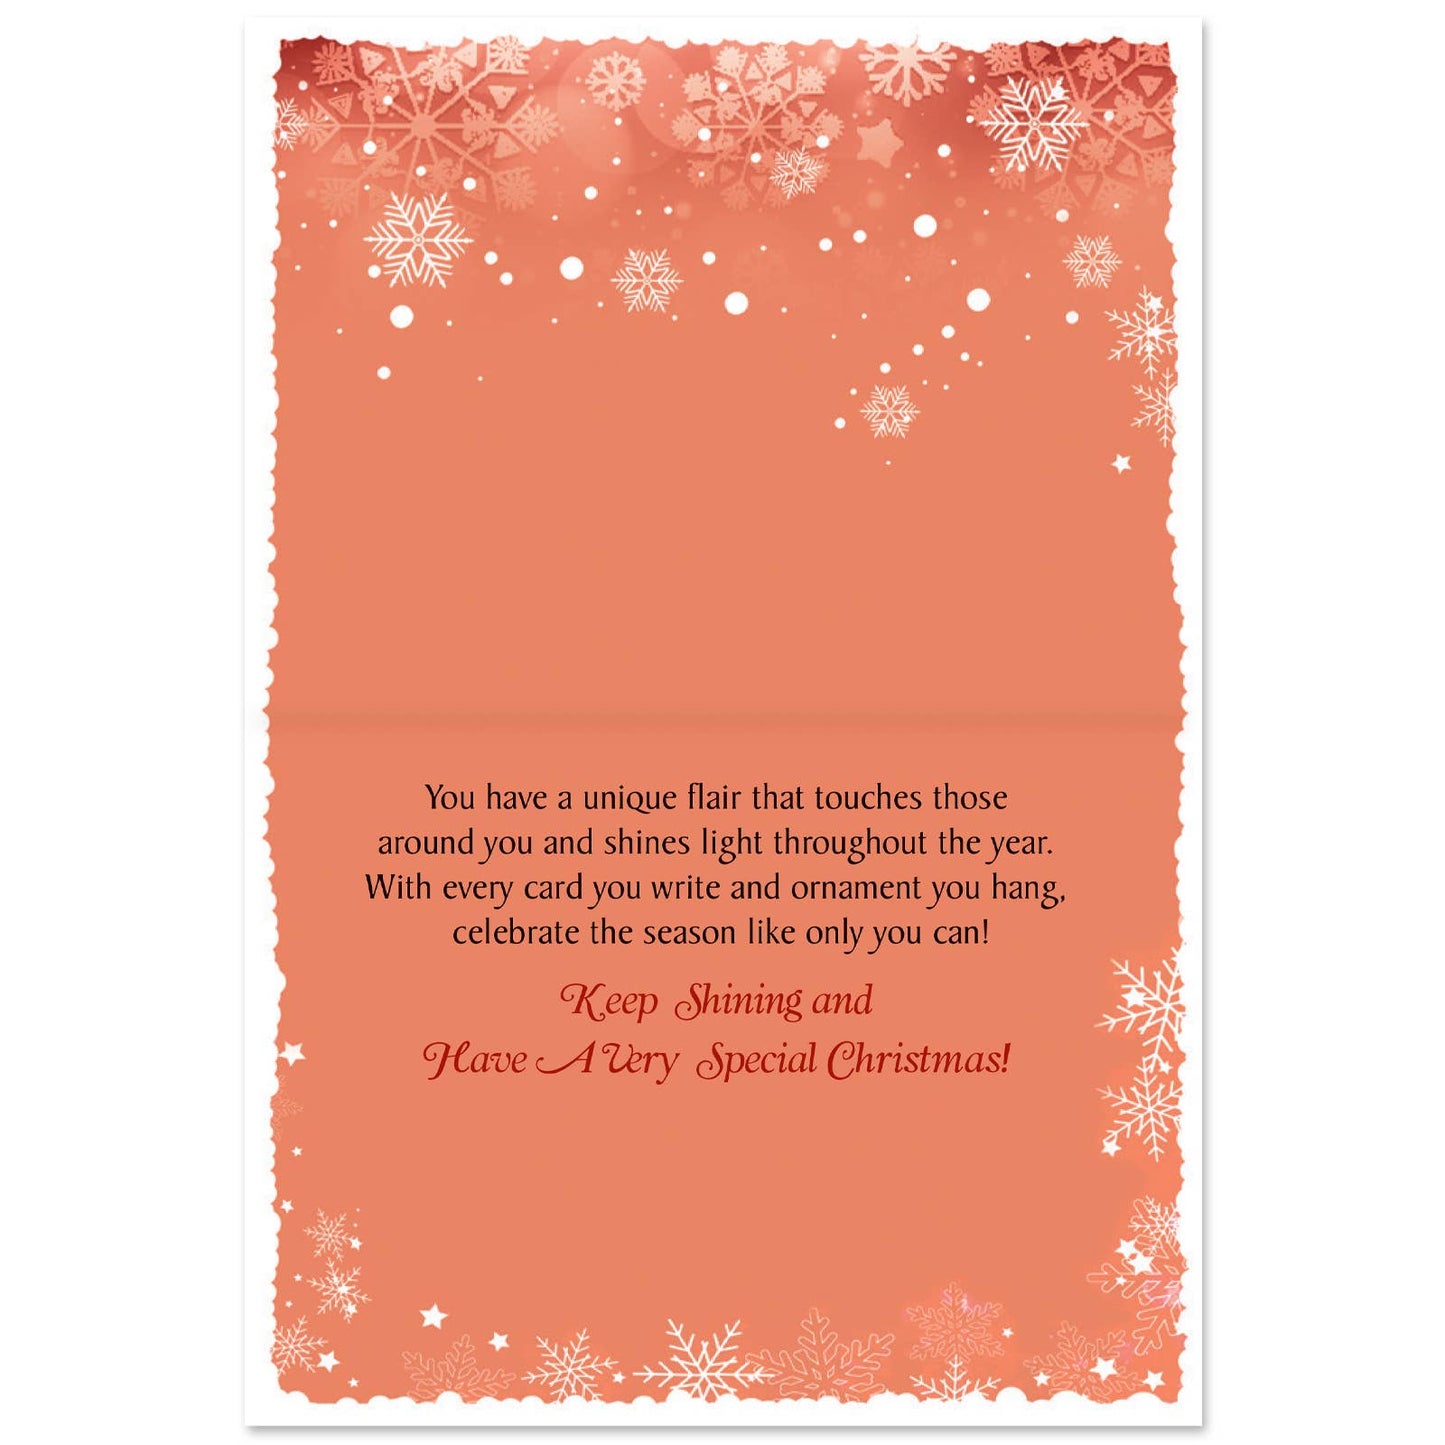 Shades of Color, LLC - Holiday Cards Merry & Bright